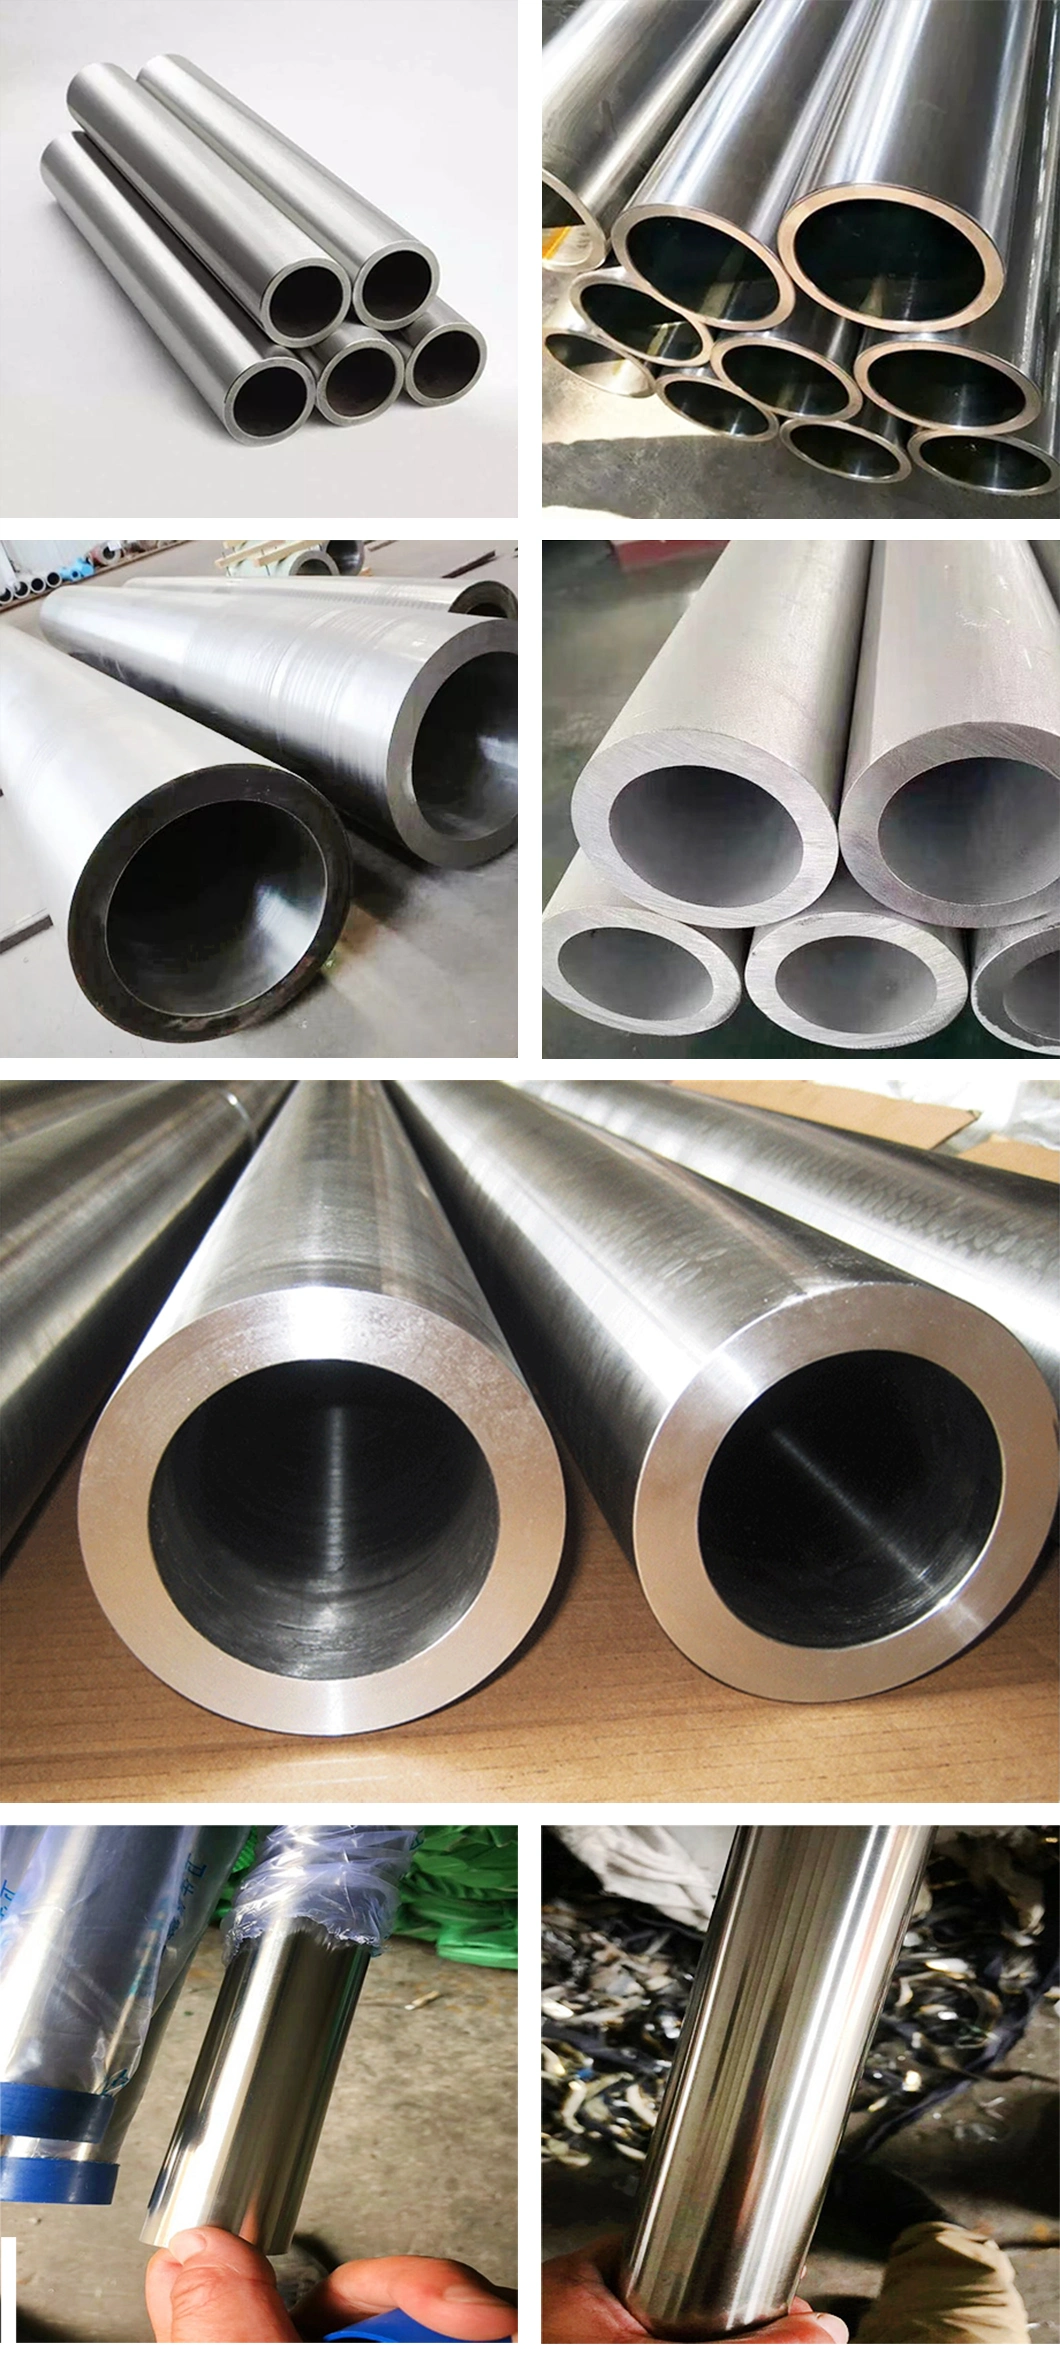 SGS with Best Competitive Price Monel 400 (UNS N04400) Tube Super Monel Alloy Pipe